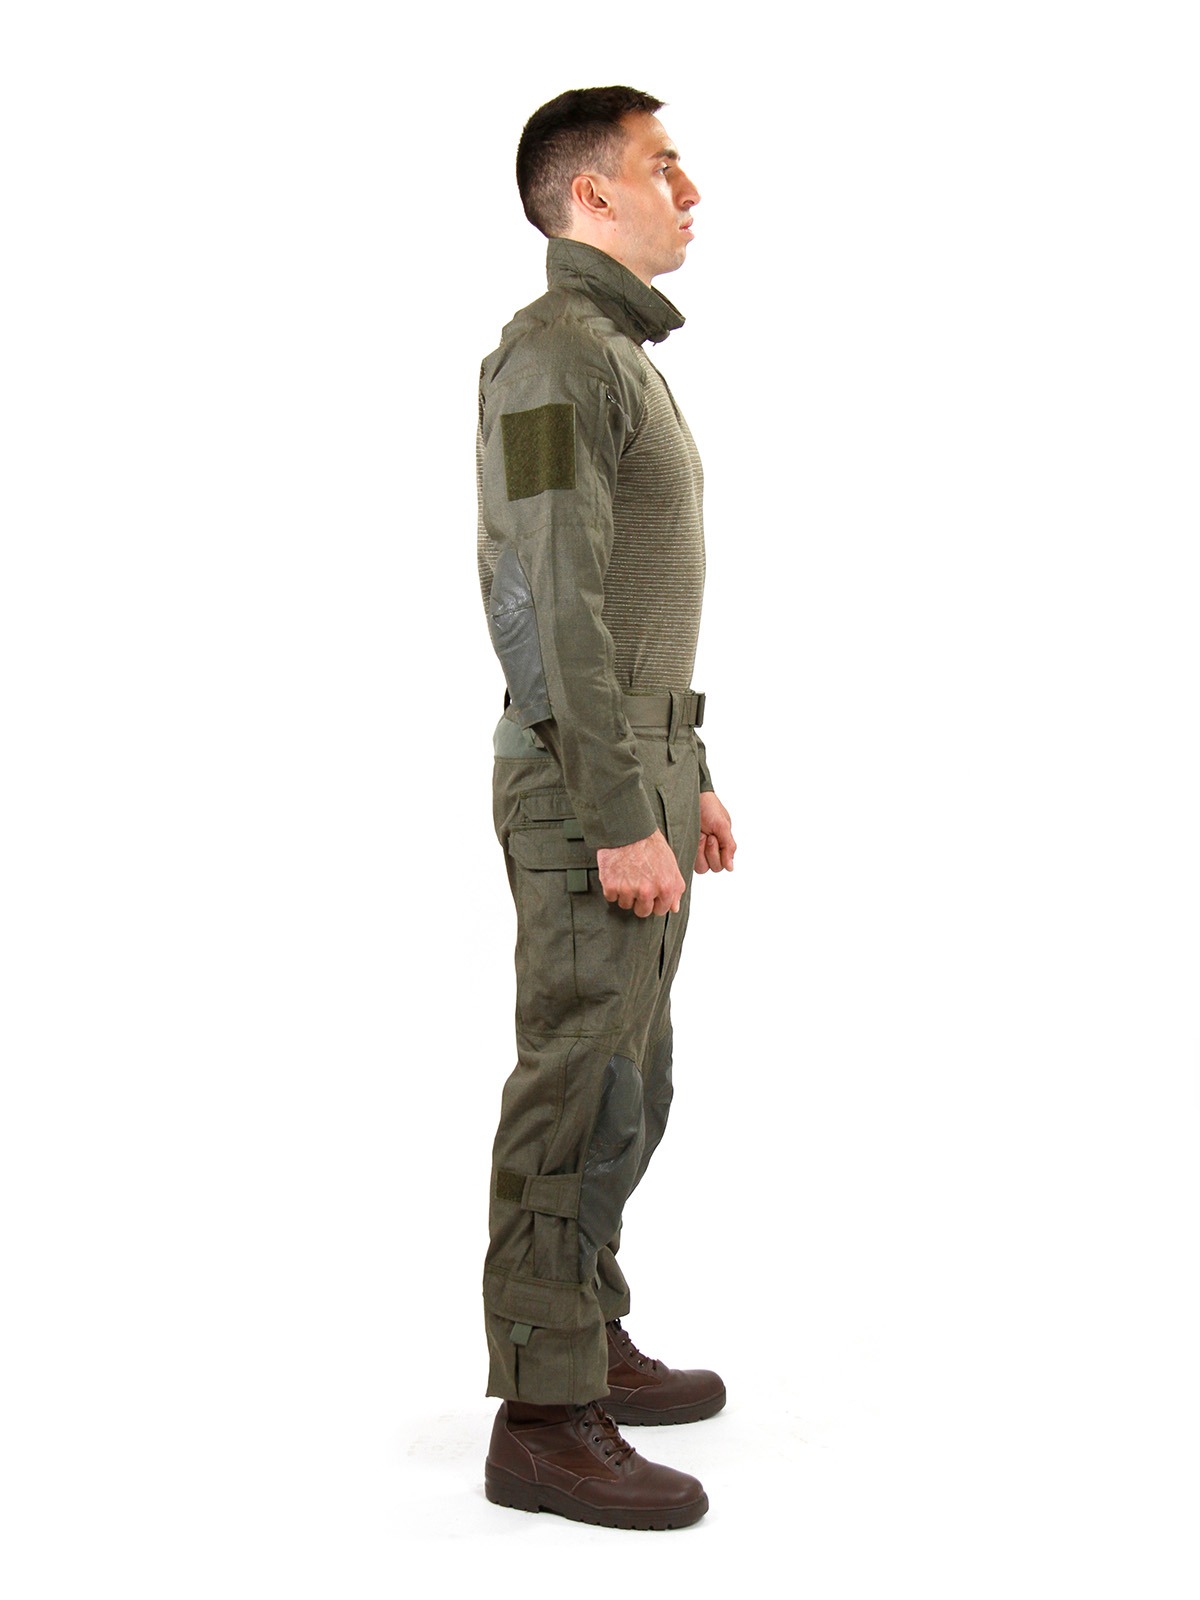 SOURCE Duratec Advanced Combat Clothing System (ACCS) - Source Tactical Gear